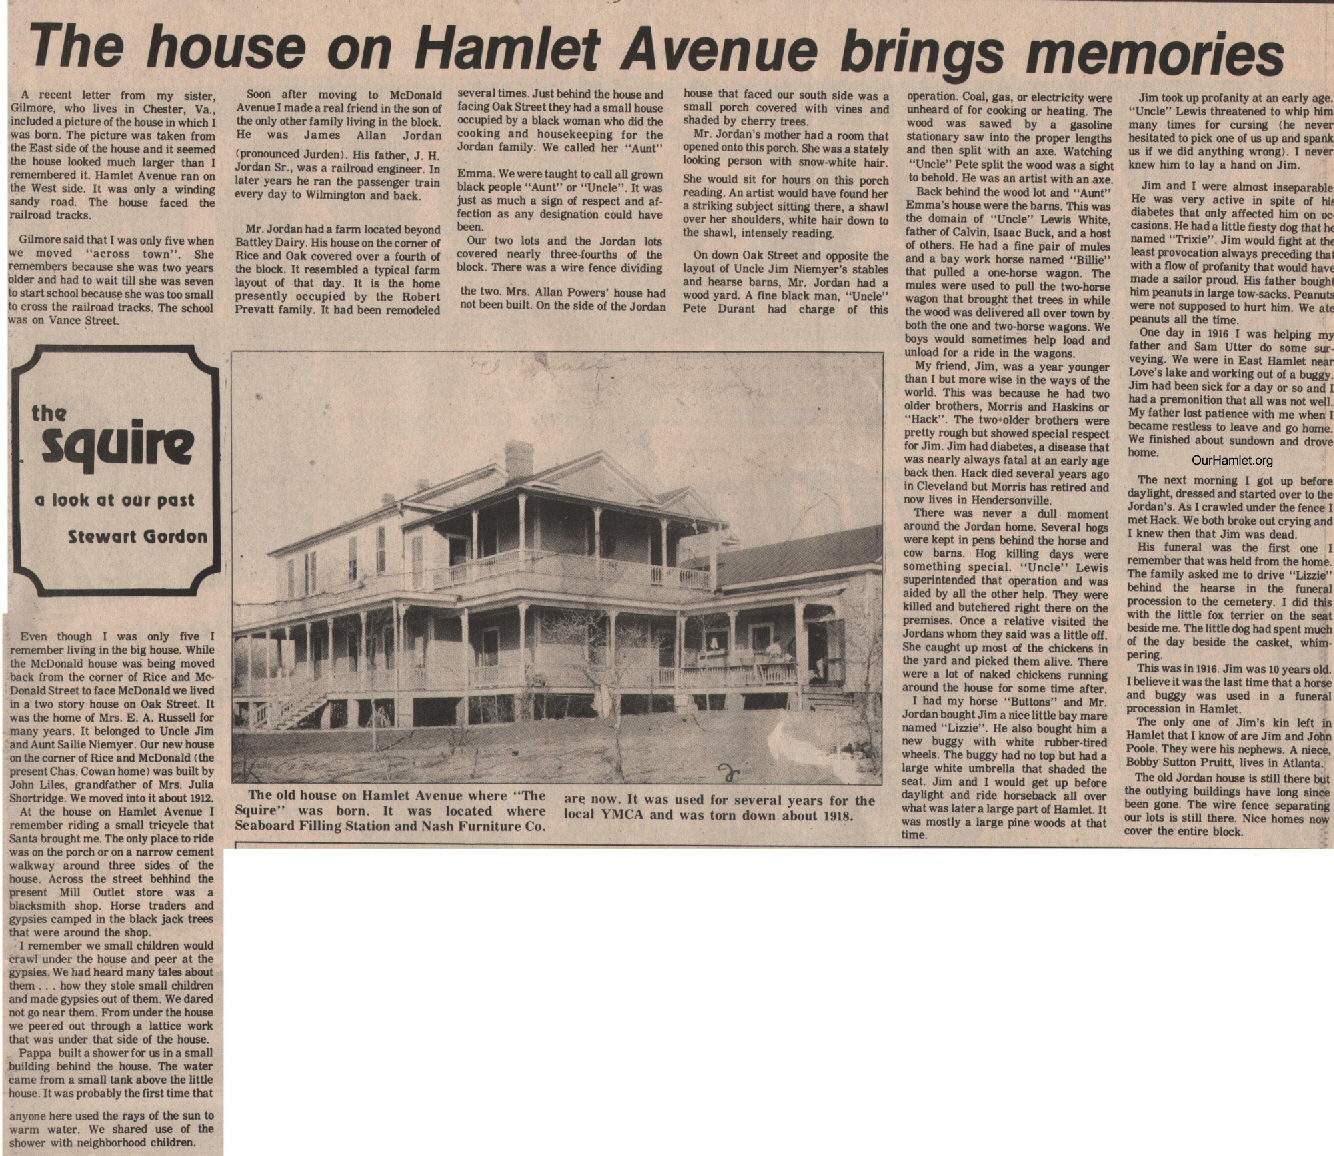 The Squire - The house on Hamlet Avenue brings memories OH